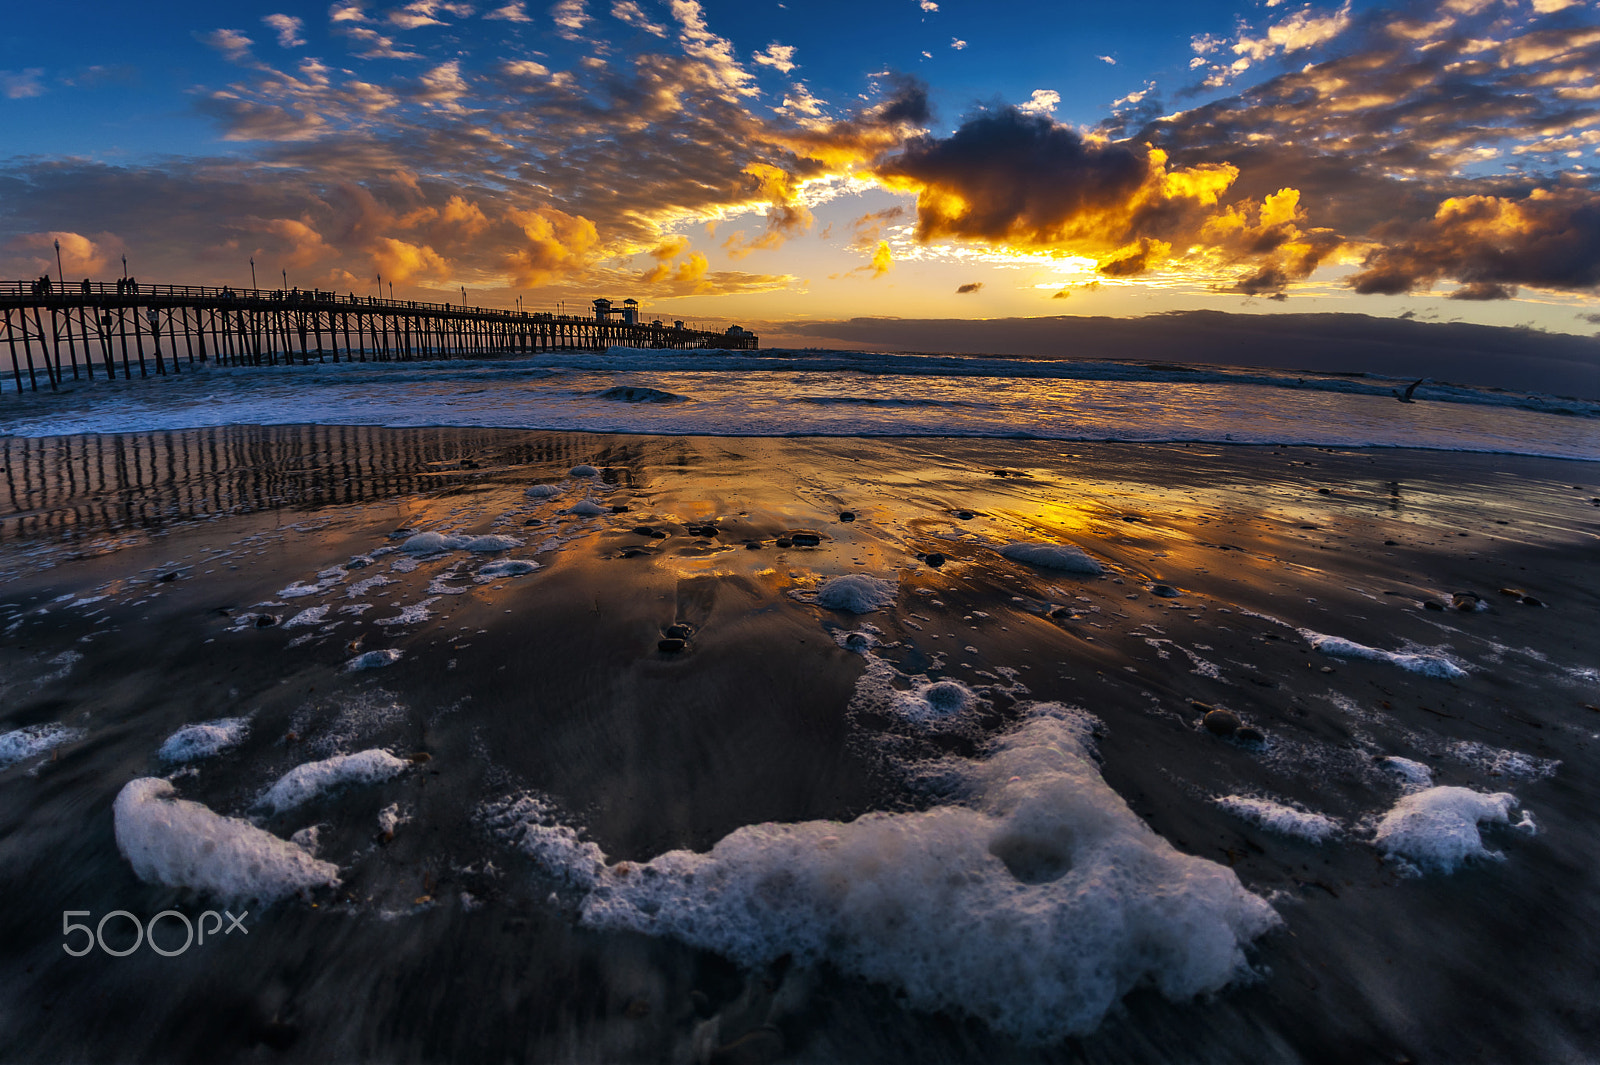 Nikon D700 + Sigma 15mm F2.8 EX DG Diagonal Fisheye sample photo. Sunset at the pier in oceanside - february 19, 2017 photography